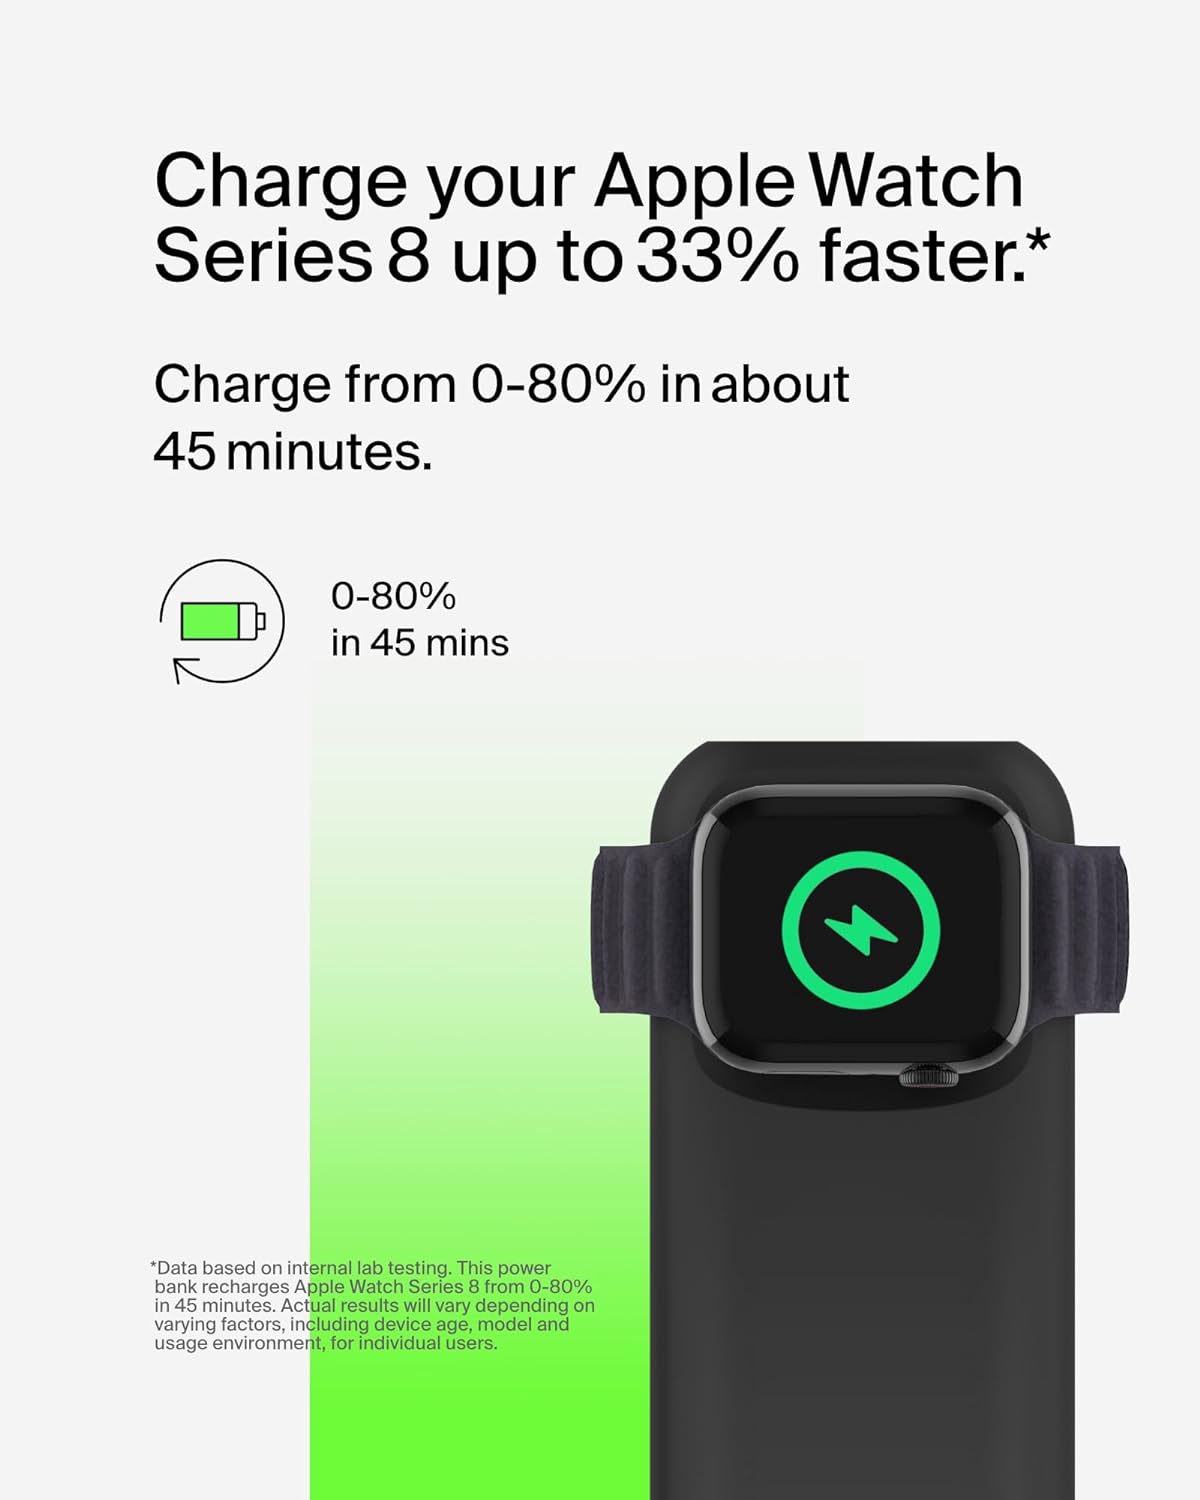 Belkin Power Bank with Integrated Apple Watch Charger On Sale for 20% Off [Big Spring Sale]